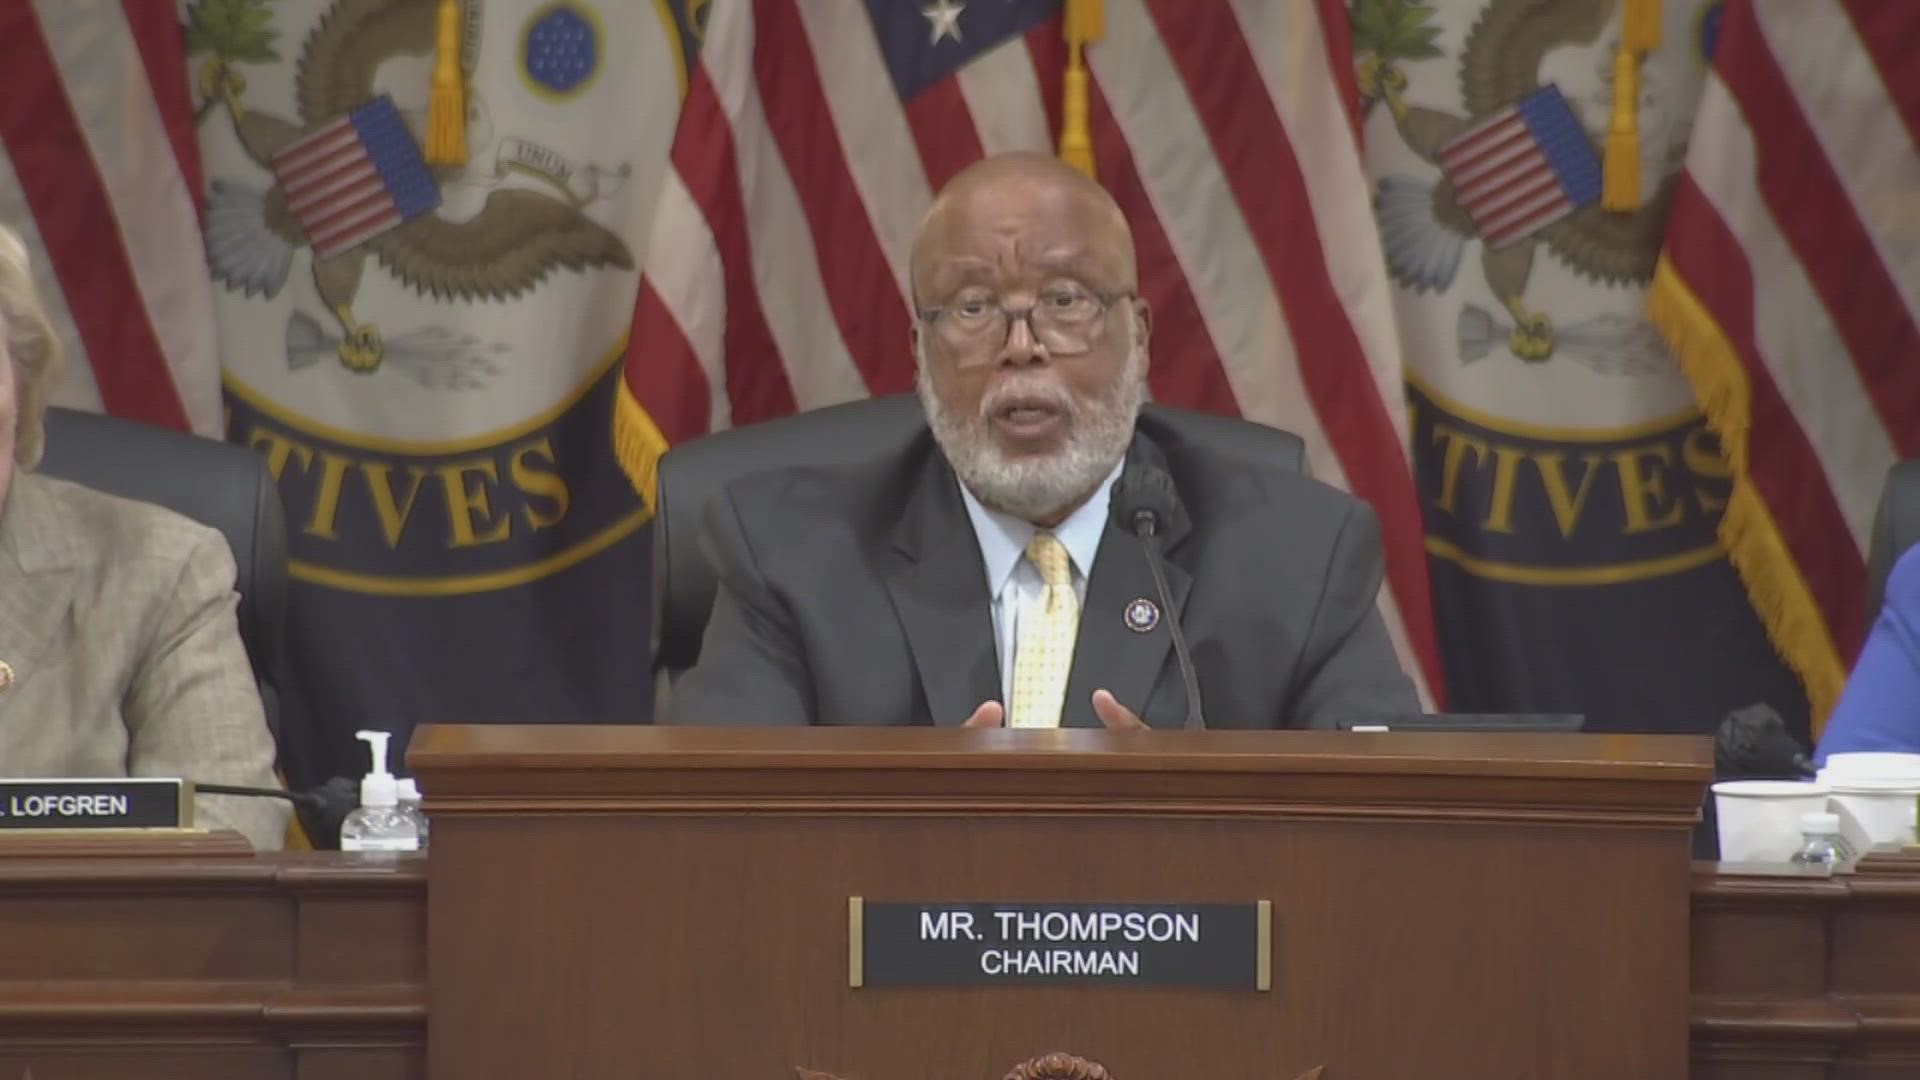 WATCH: Rep. Bennie Thompson, D-Miss., said "the world is watching" the U.S. response to the panel's yearlong investigation into the Capitol riot.